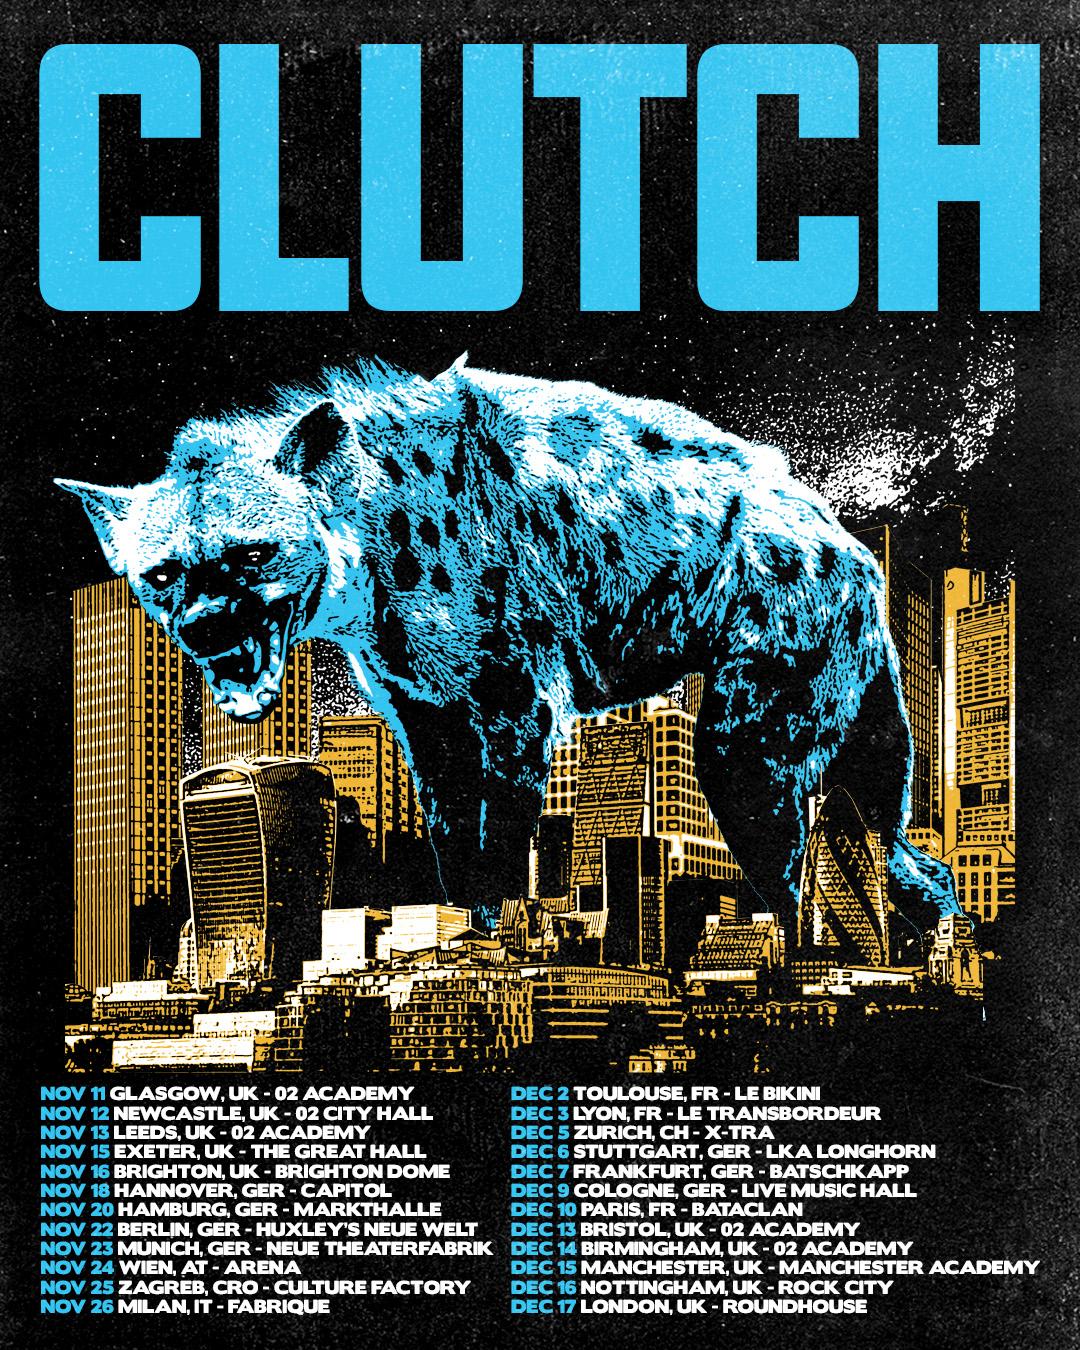 CLUTCH - Free Livestream To Celebrate Release Of New Album, Sunrise On Slaughter Beach